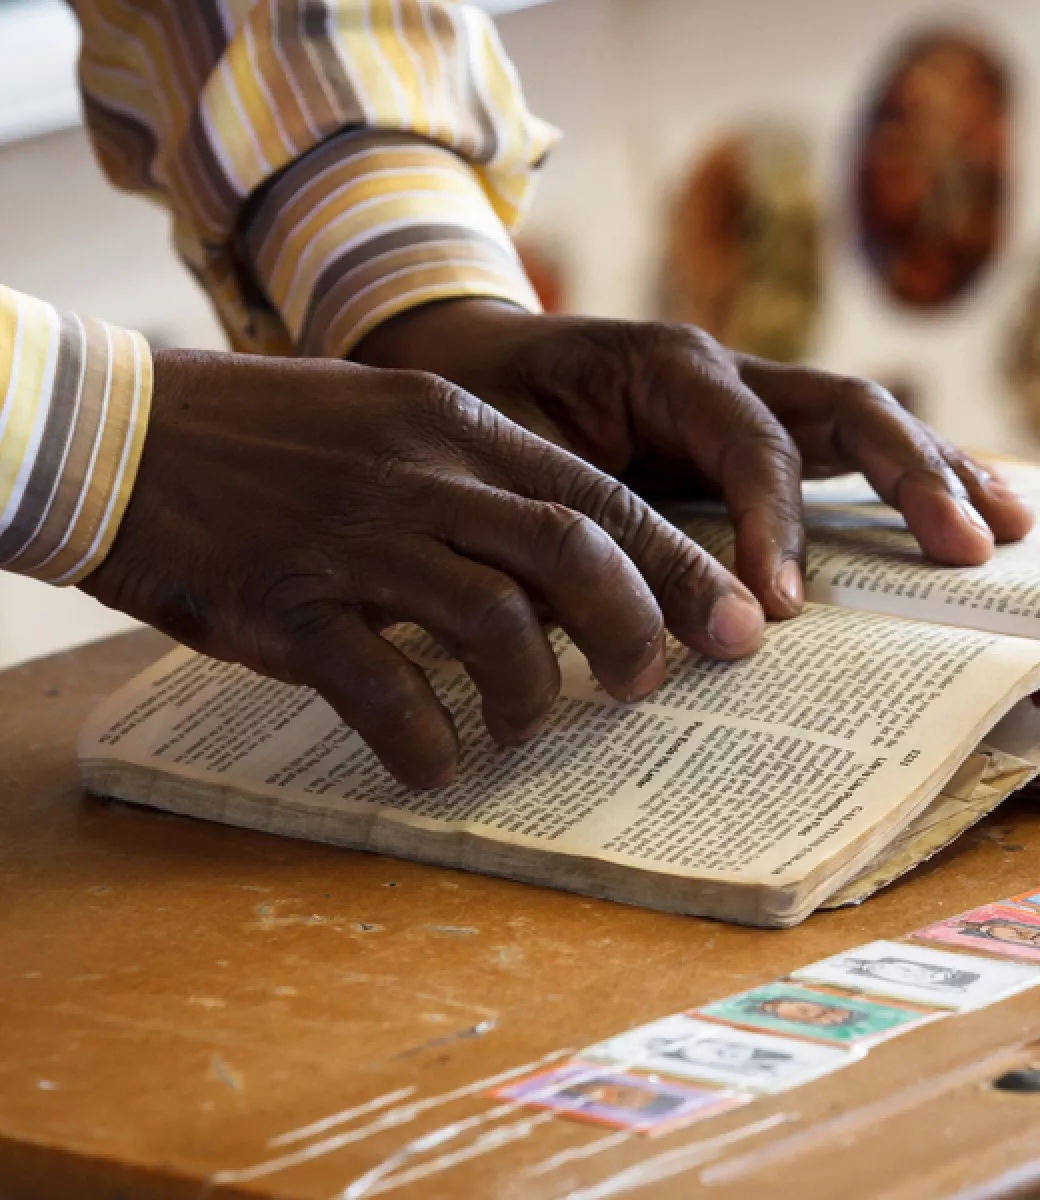 Wycliffe Sees Record Number of Completed Bible Translations in 2020 Despite Coronavirus Pandemic